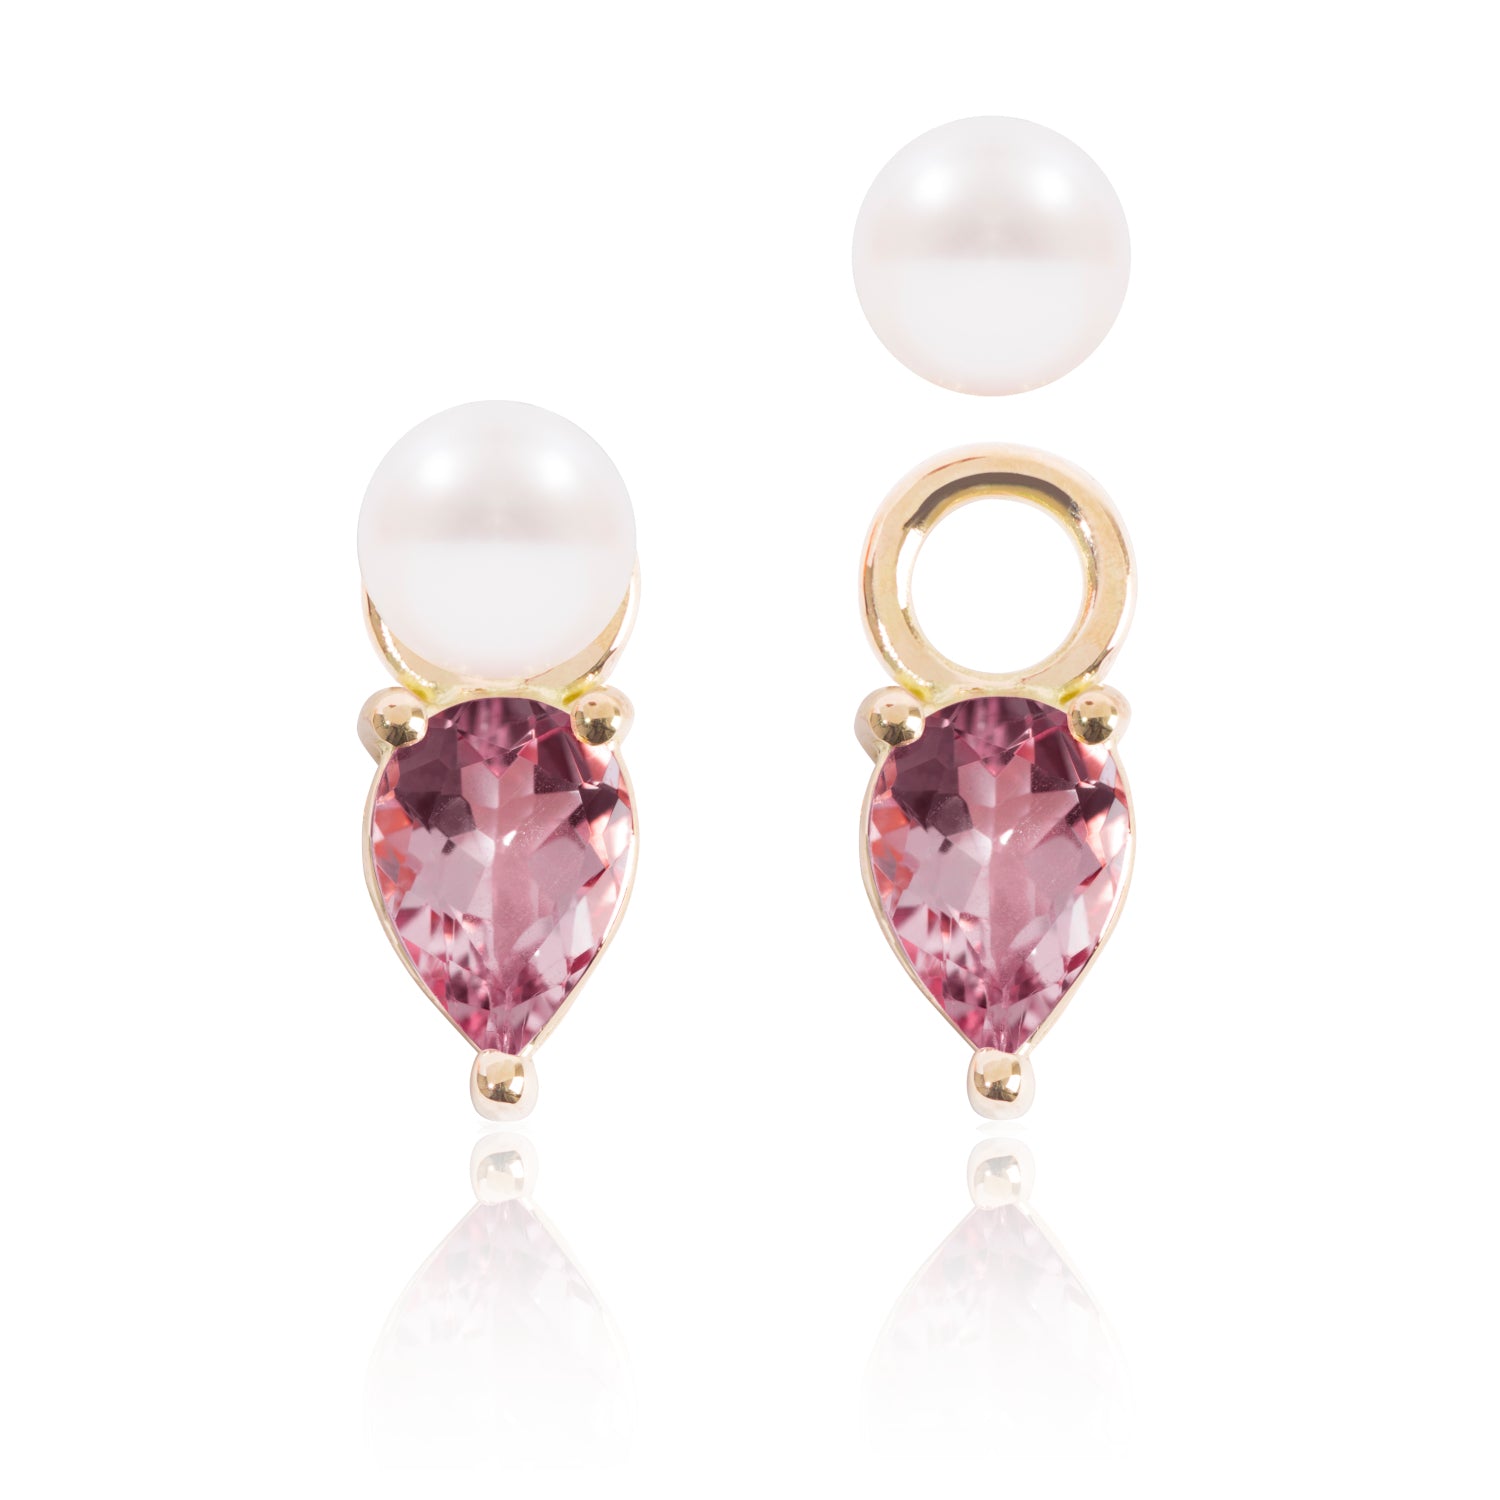 Mini Pearl & Bright Pink Tourmaline Earring Pendants with one detached by McFarlane Fine Jewellery